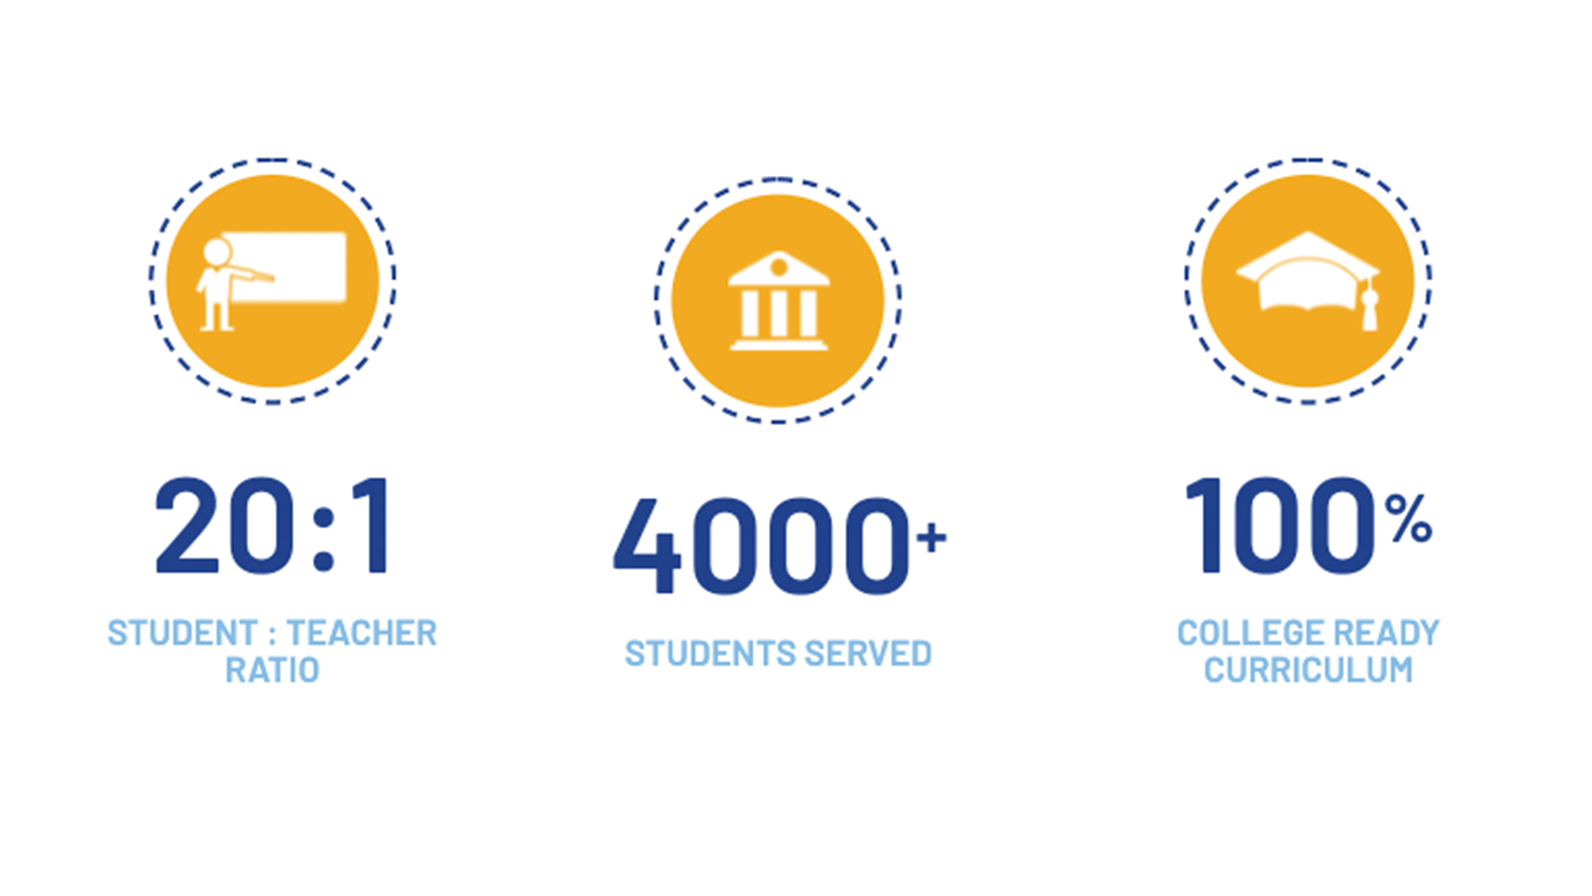 20:1 Student to Teacher Ratio, 4000+ Students Served, 100% College Ready Curriculum 